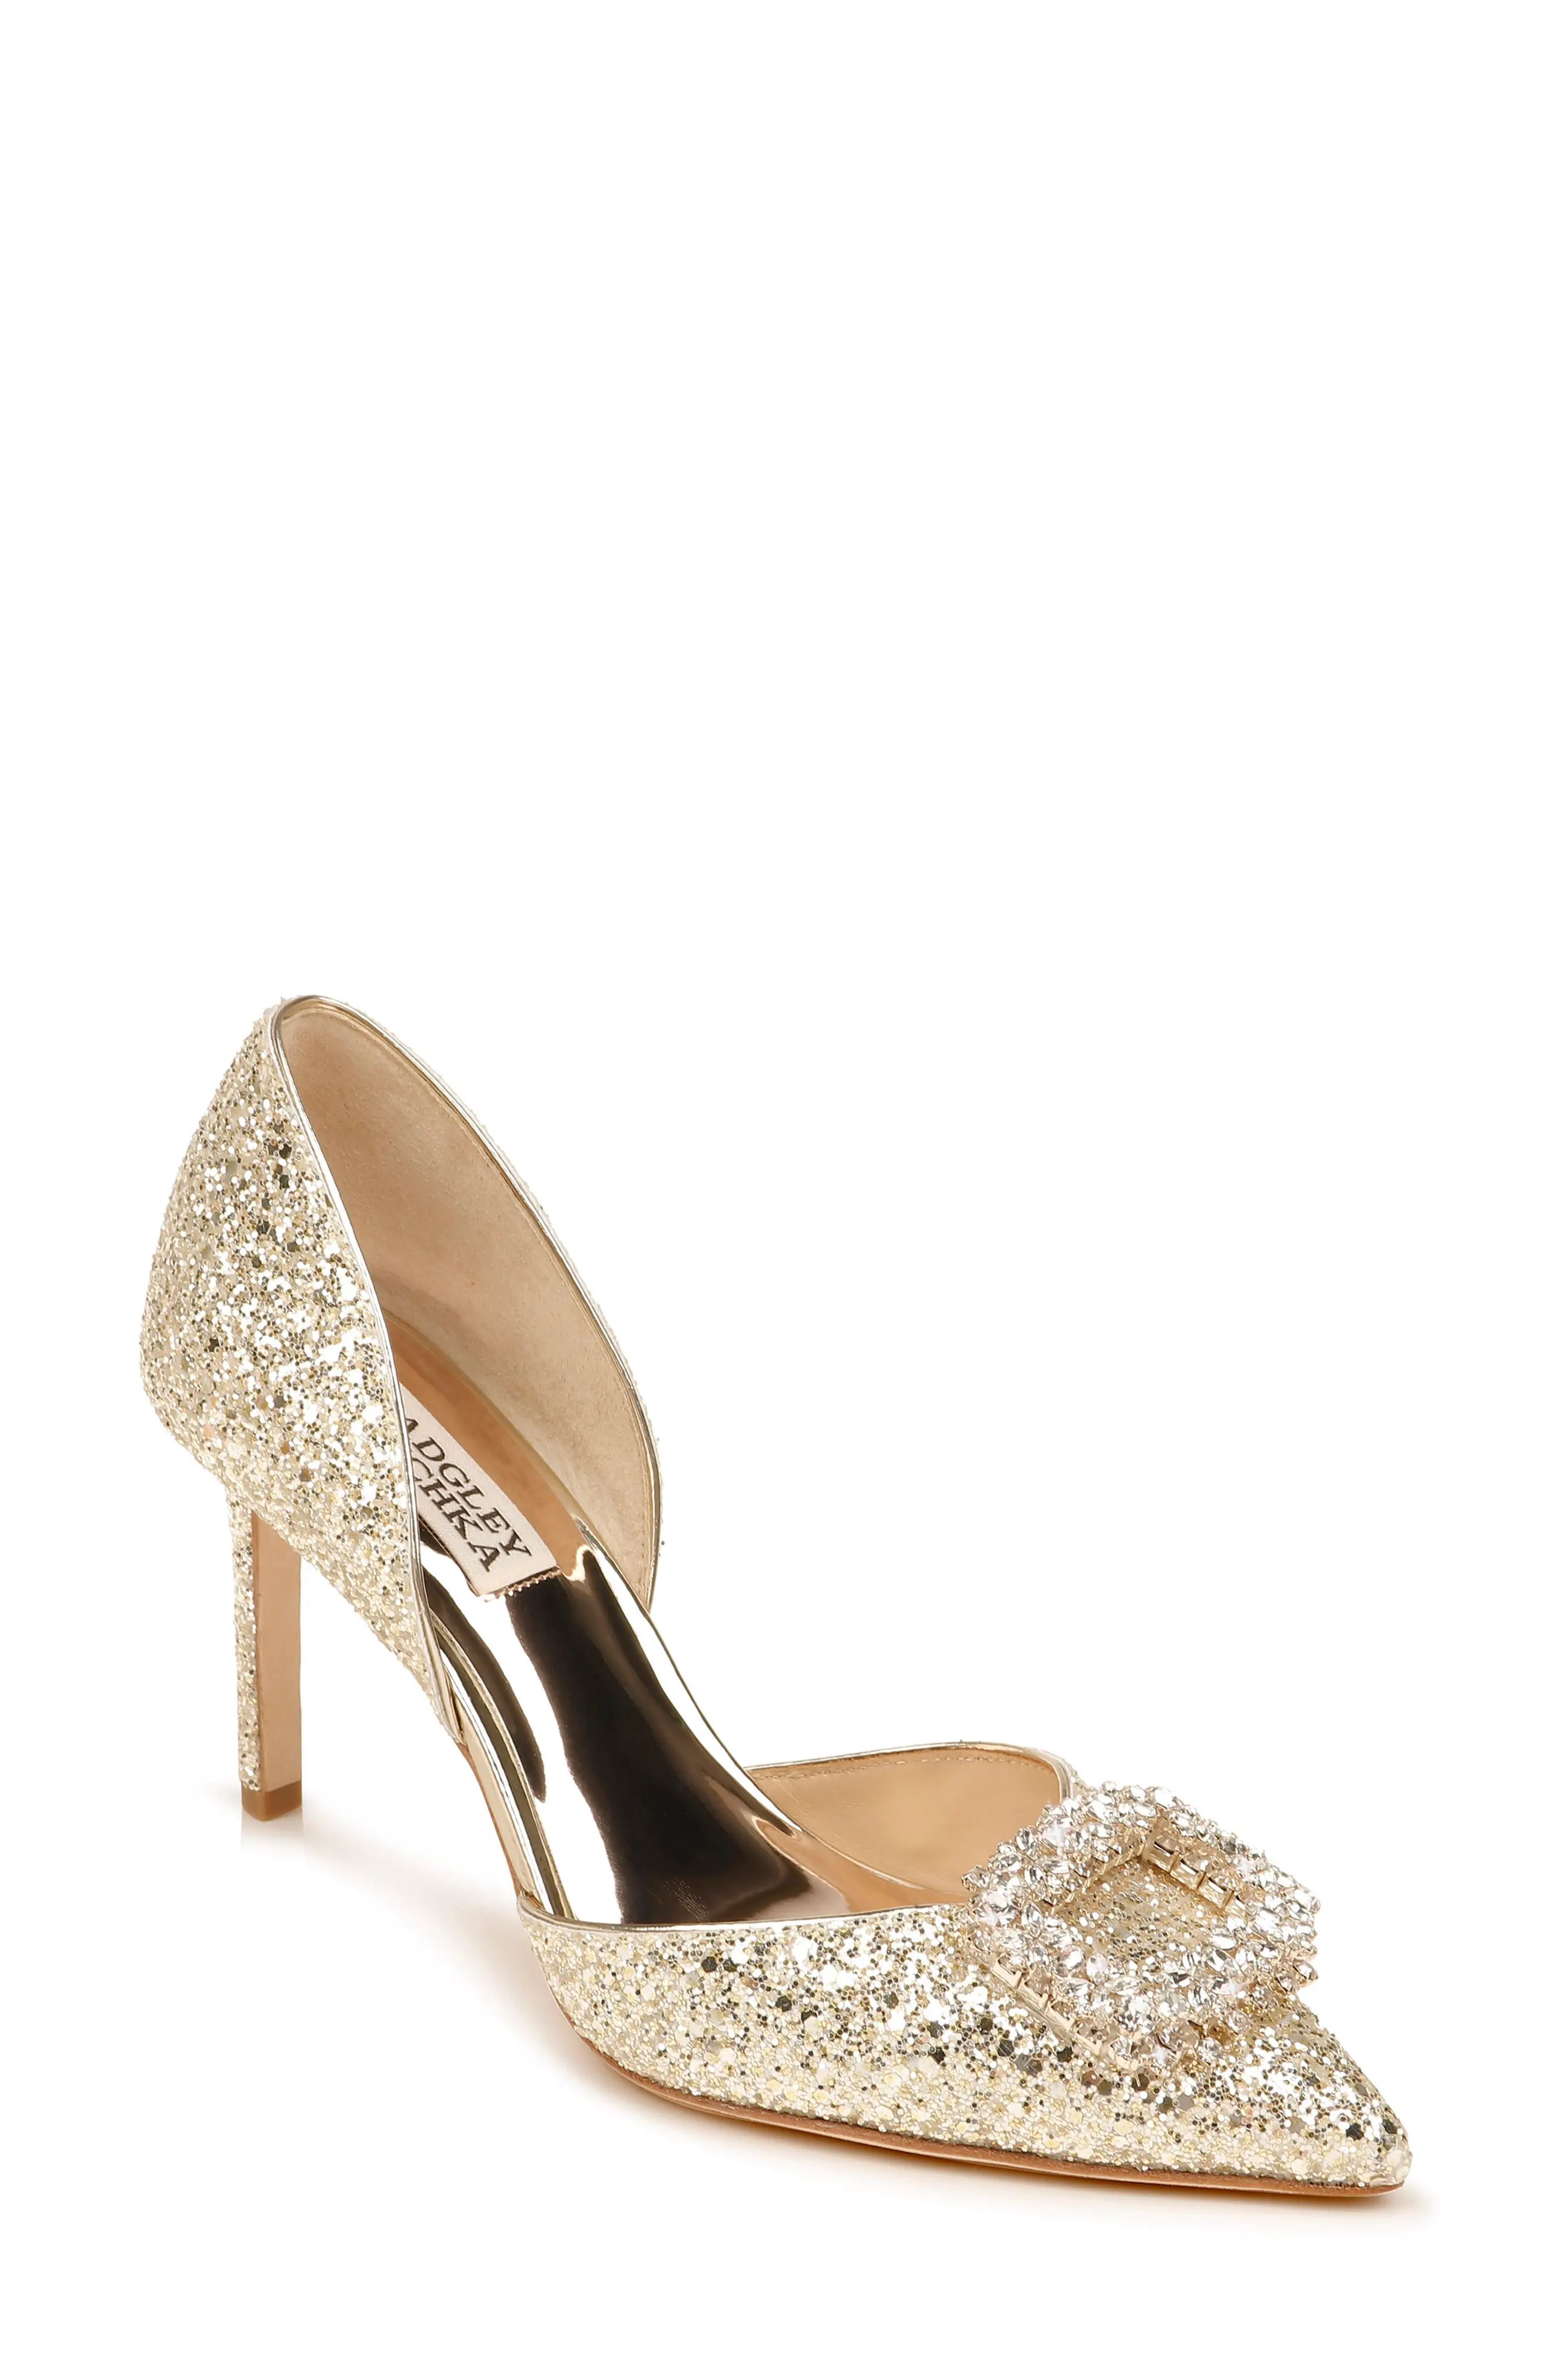 Women's Badgley Mischka Gaiana Crystal Embellished Pointed Toe D'Orsay Pump, Size 8.5 M - Metallic | Nordstrom